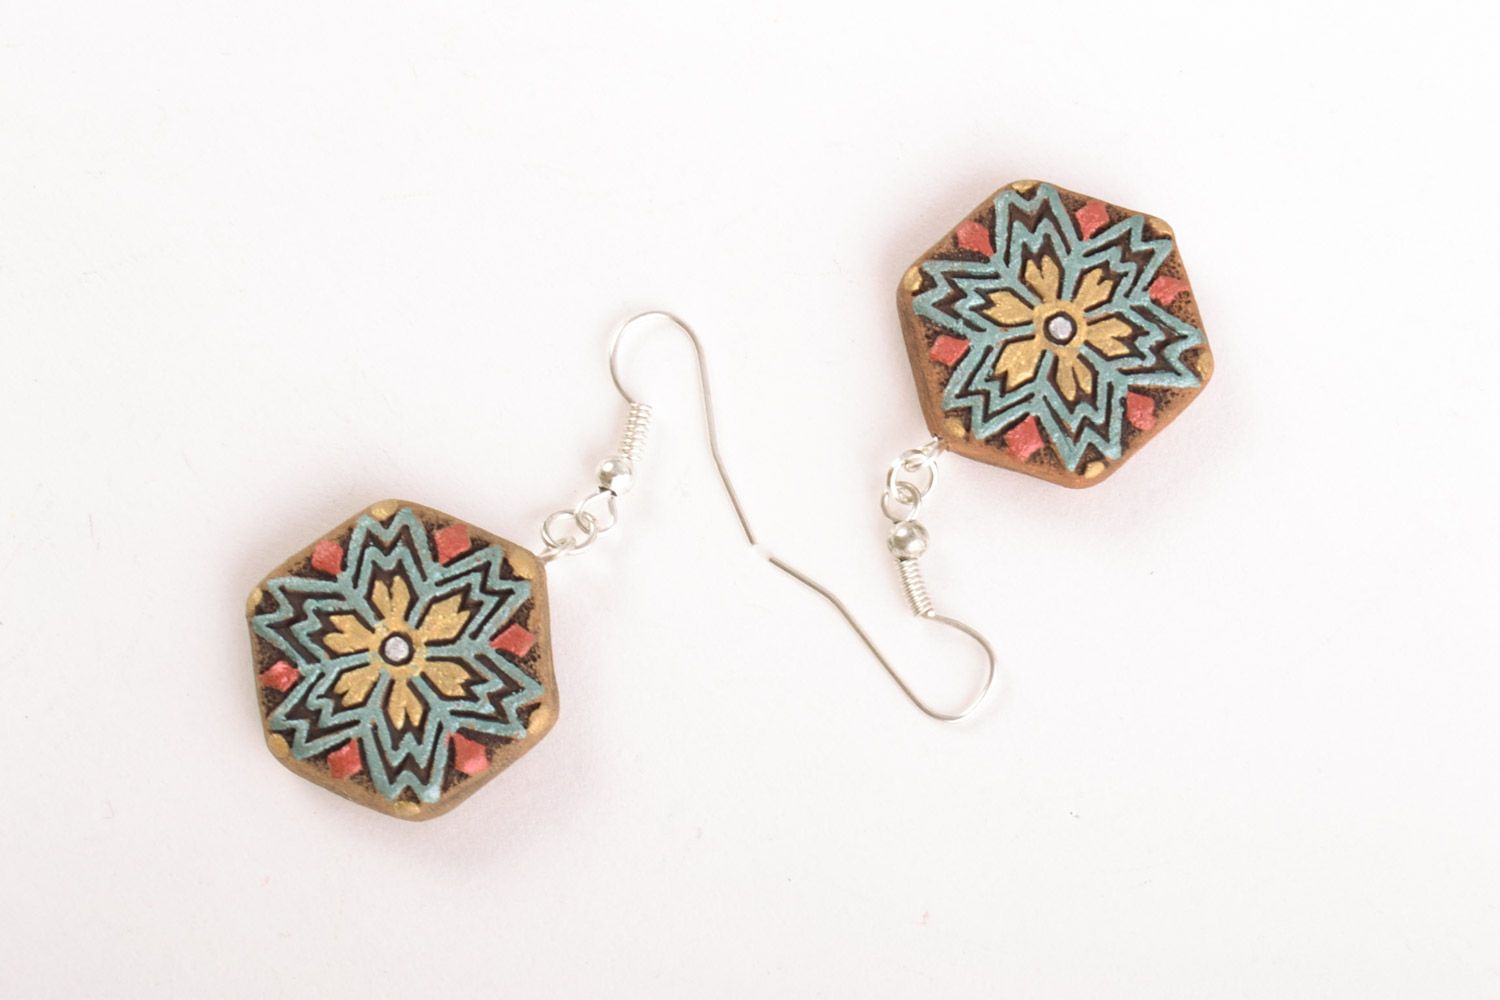 Handmade ceramic dangling earrings ornaments with acrylic paints in ethnic style photo 5